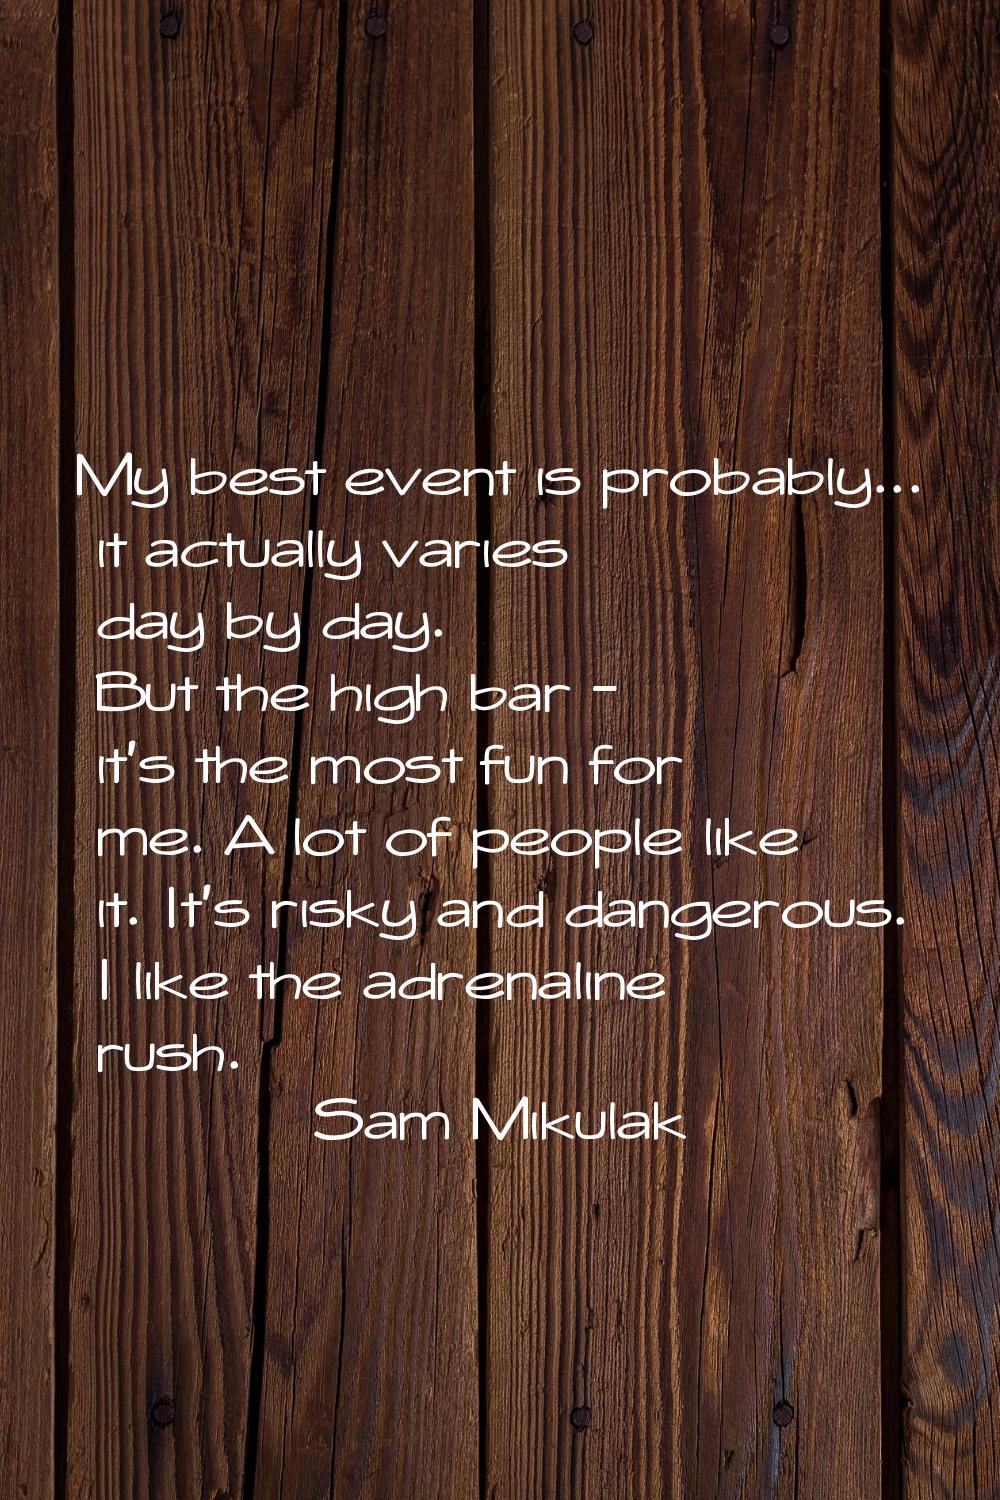 My best event is probably... it actually varies day by day. But the high bar - it's the most fun fo